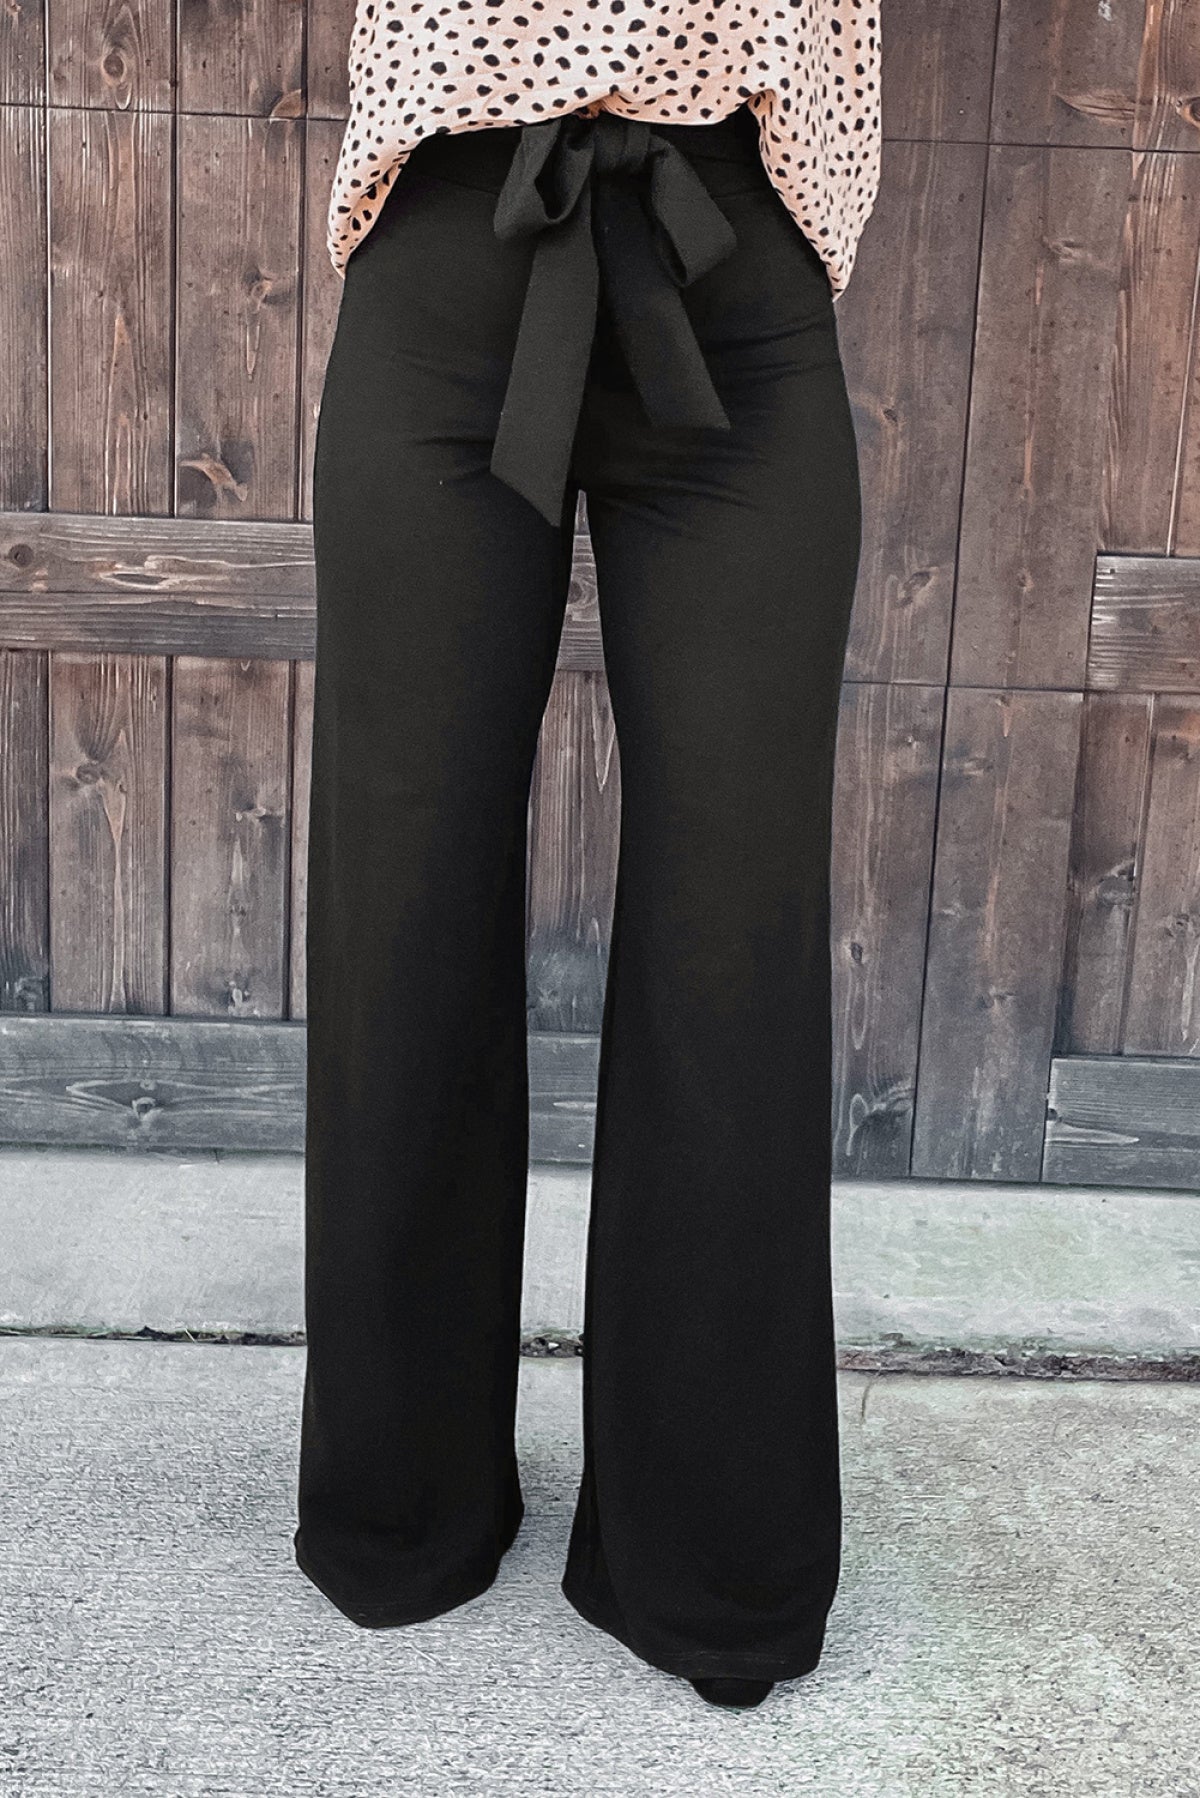 Black High Waist Front Tie Flared Pants